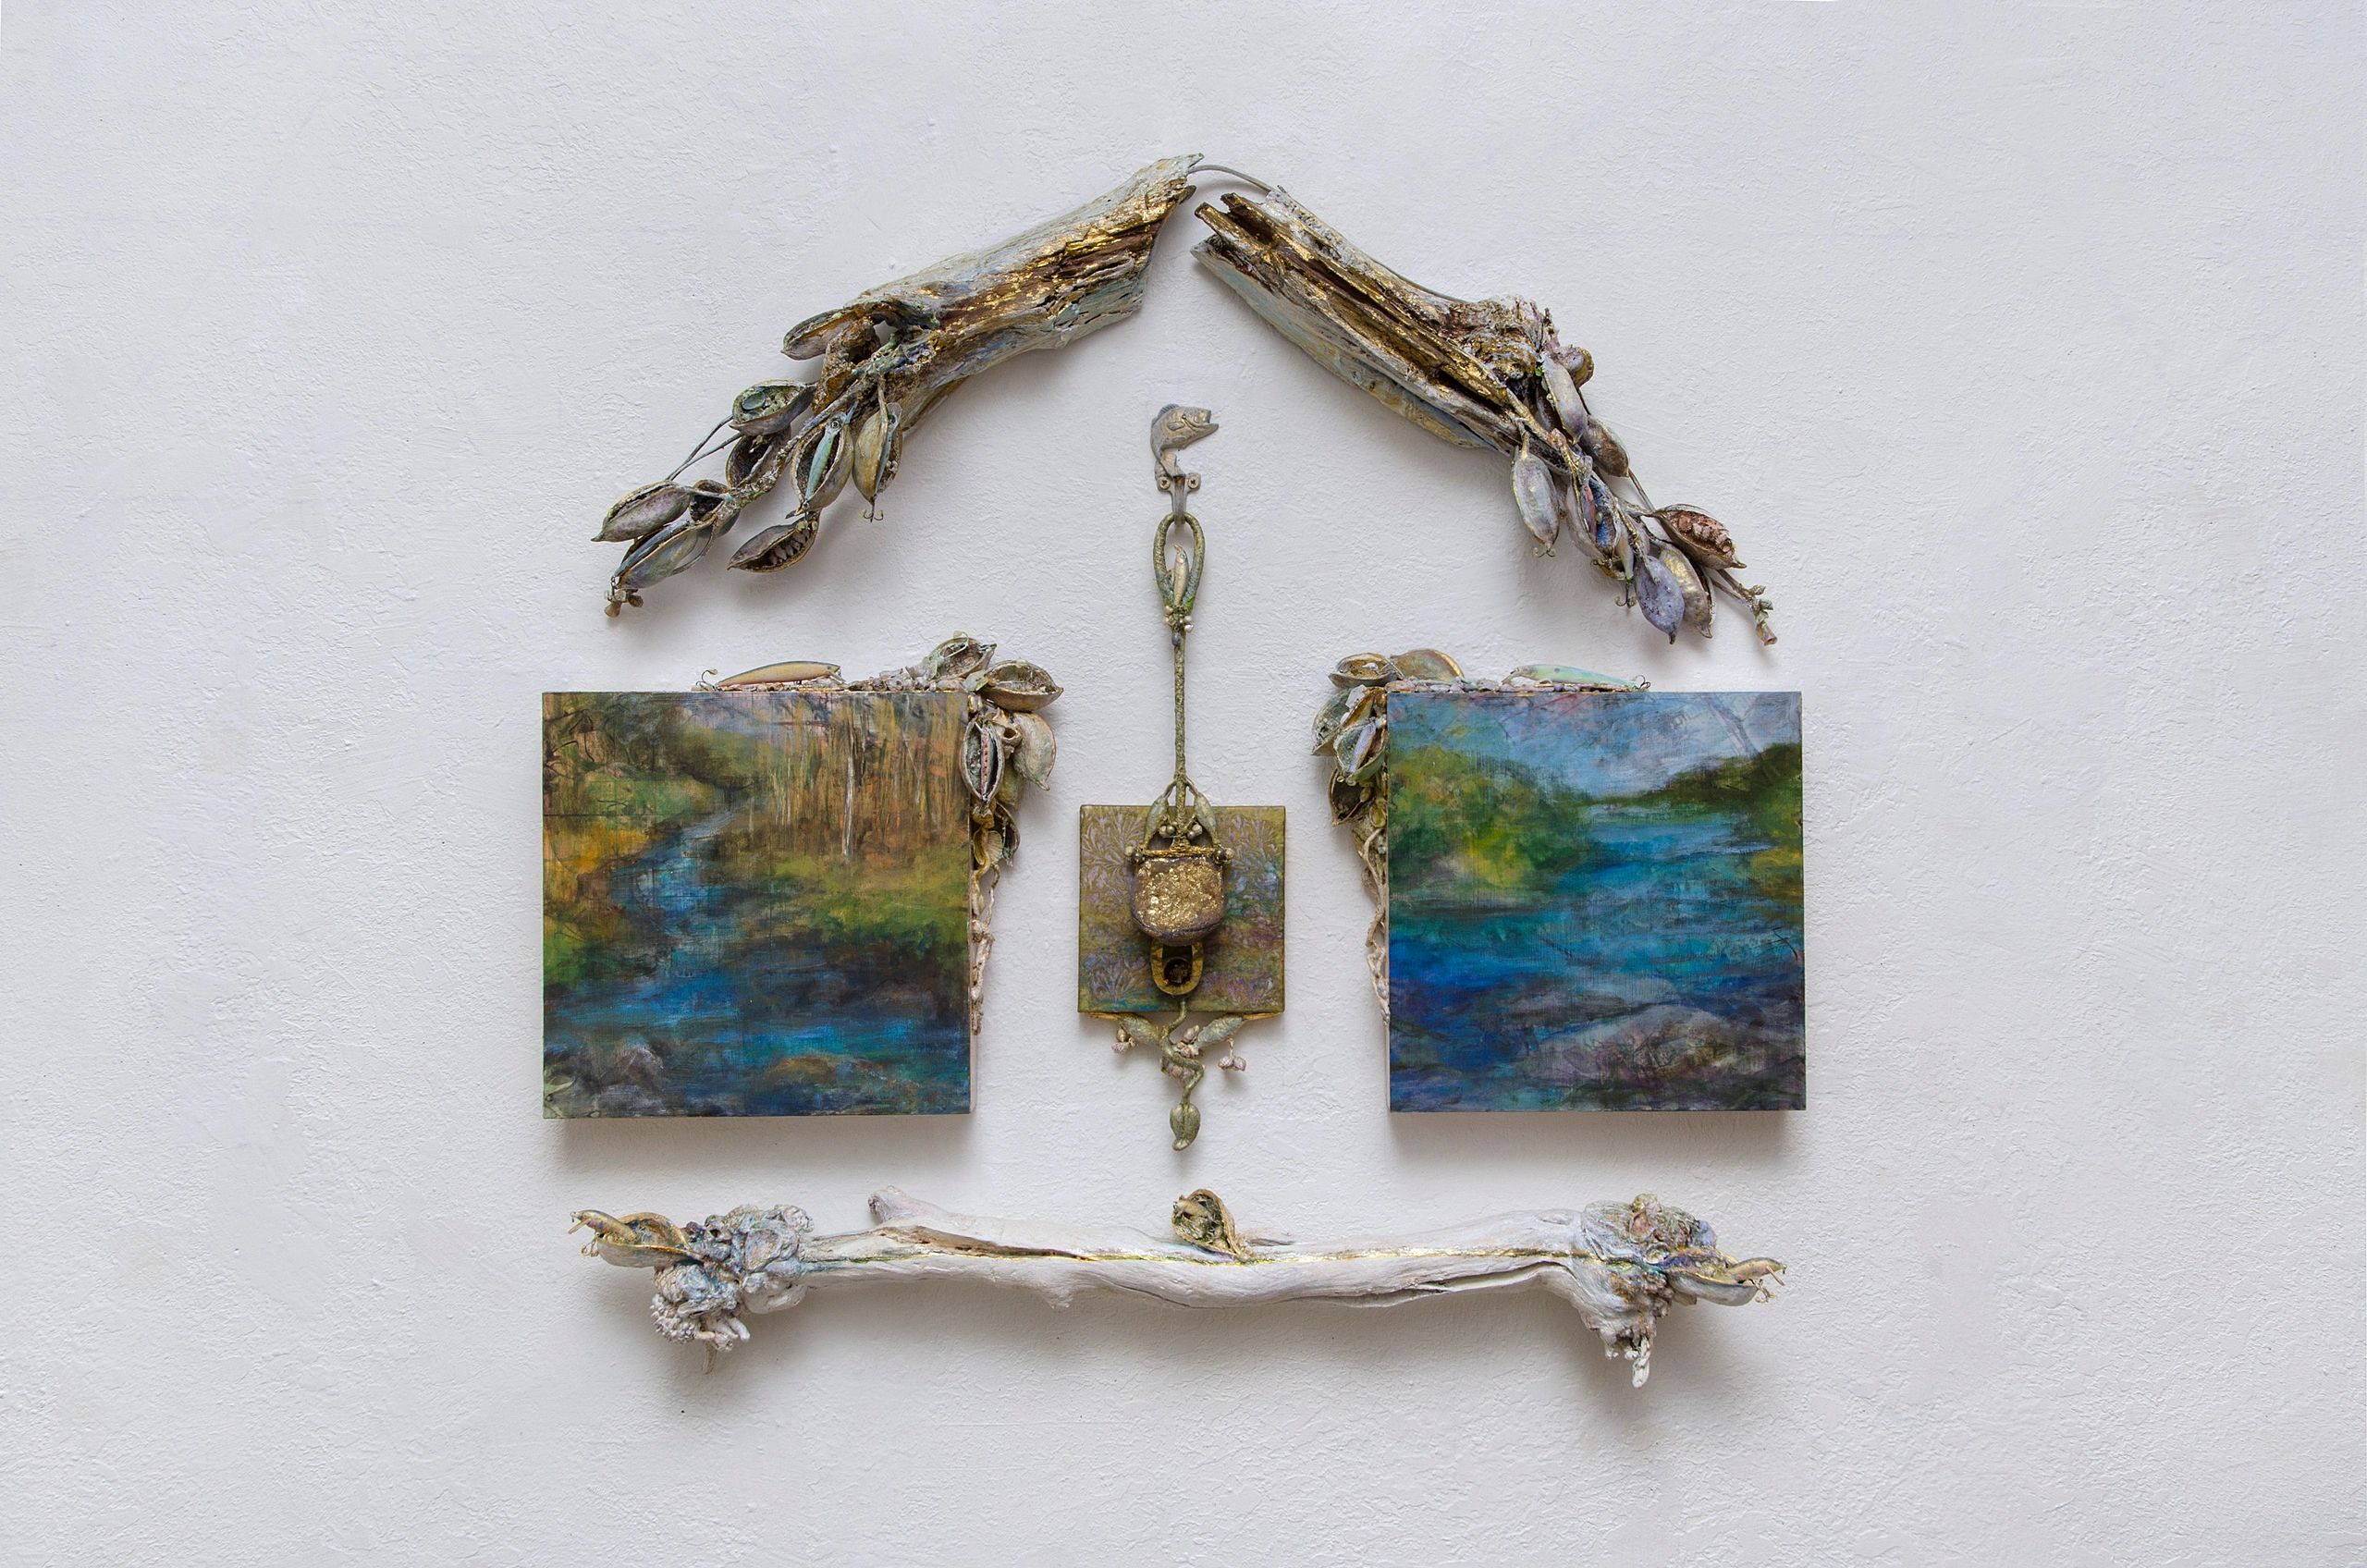 {"blocks":[{"key":"tkl5","text":"Sanctuary - mixed media: oil on panels, metal, wire, pods, branches, gold leaf, fishing lures, shells","type":"unstyled","depth":0,"inlineStyleRanges":[{"offset":0,"length":12,"style":"BOLD"},{"offset":0,"length":12,"style":"ITALIC"}],"entityRanges":[],"data":{}},{"key":"bh2io","text":"37” x 36” x 4 1/2”","type":"unstyled","depth":0,"inlineStyleRanges":[],"entityRanges":[],"data":{}},{"key":"au601","text":"2015","type":"unstyled","depth":0,"inlineStyleRanges":[],"entityRanges":[],"data":{}}],"entityMap":{}}